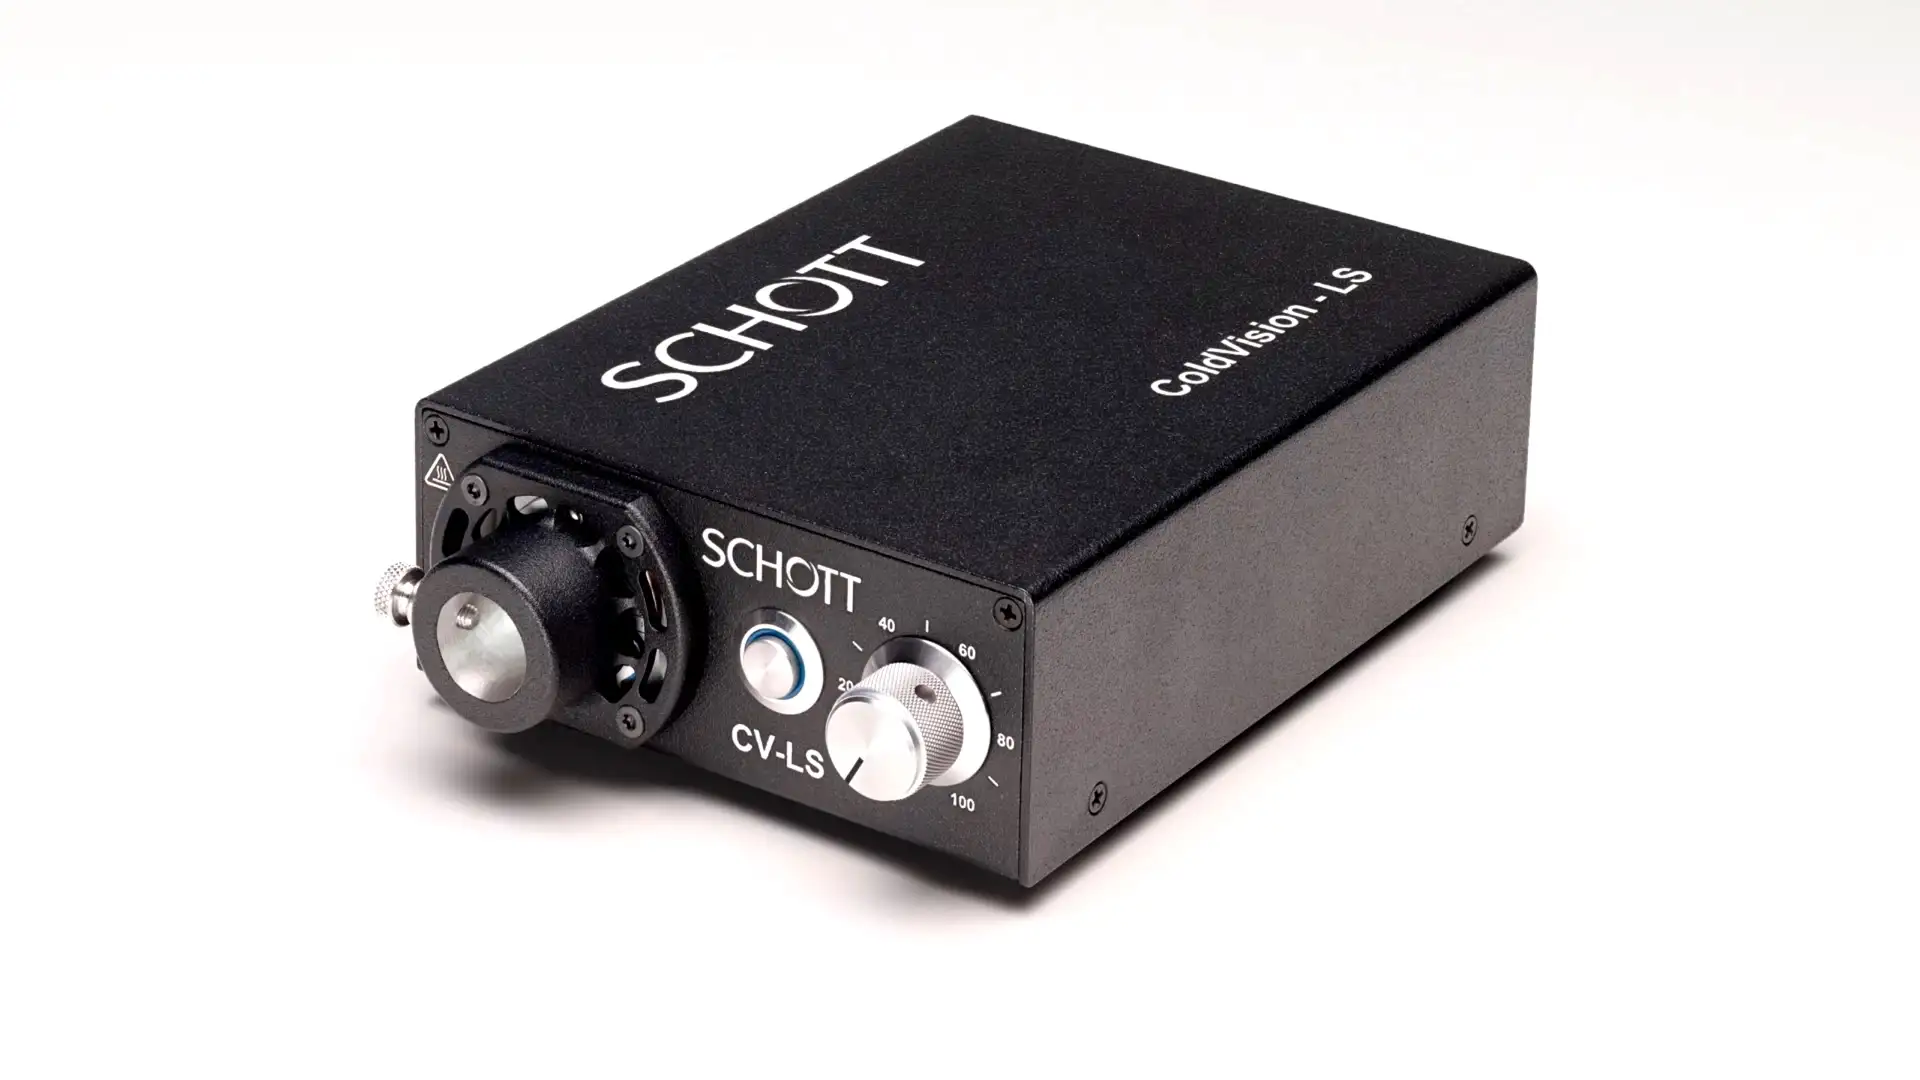 Video showing the housing of the SCHOTT ColdVision CV-LS LED light source